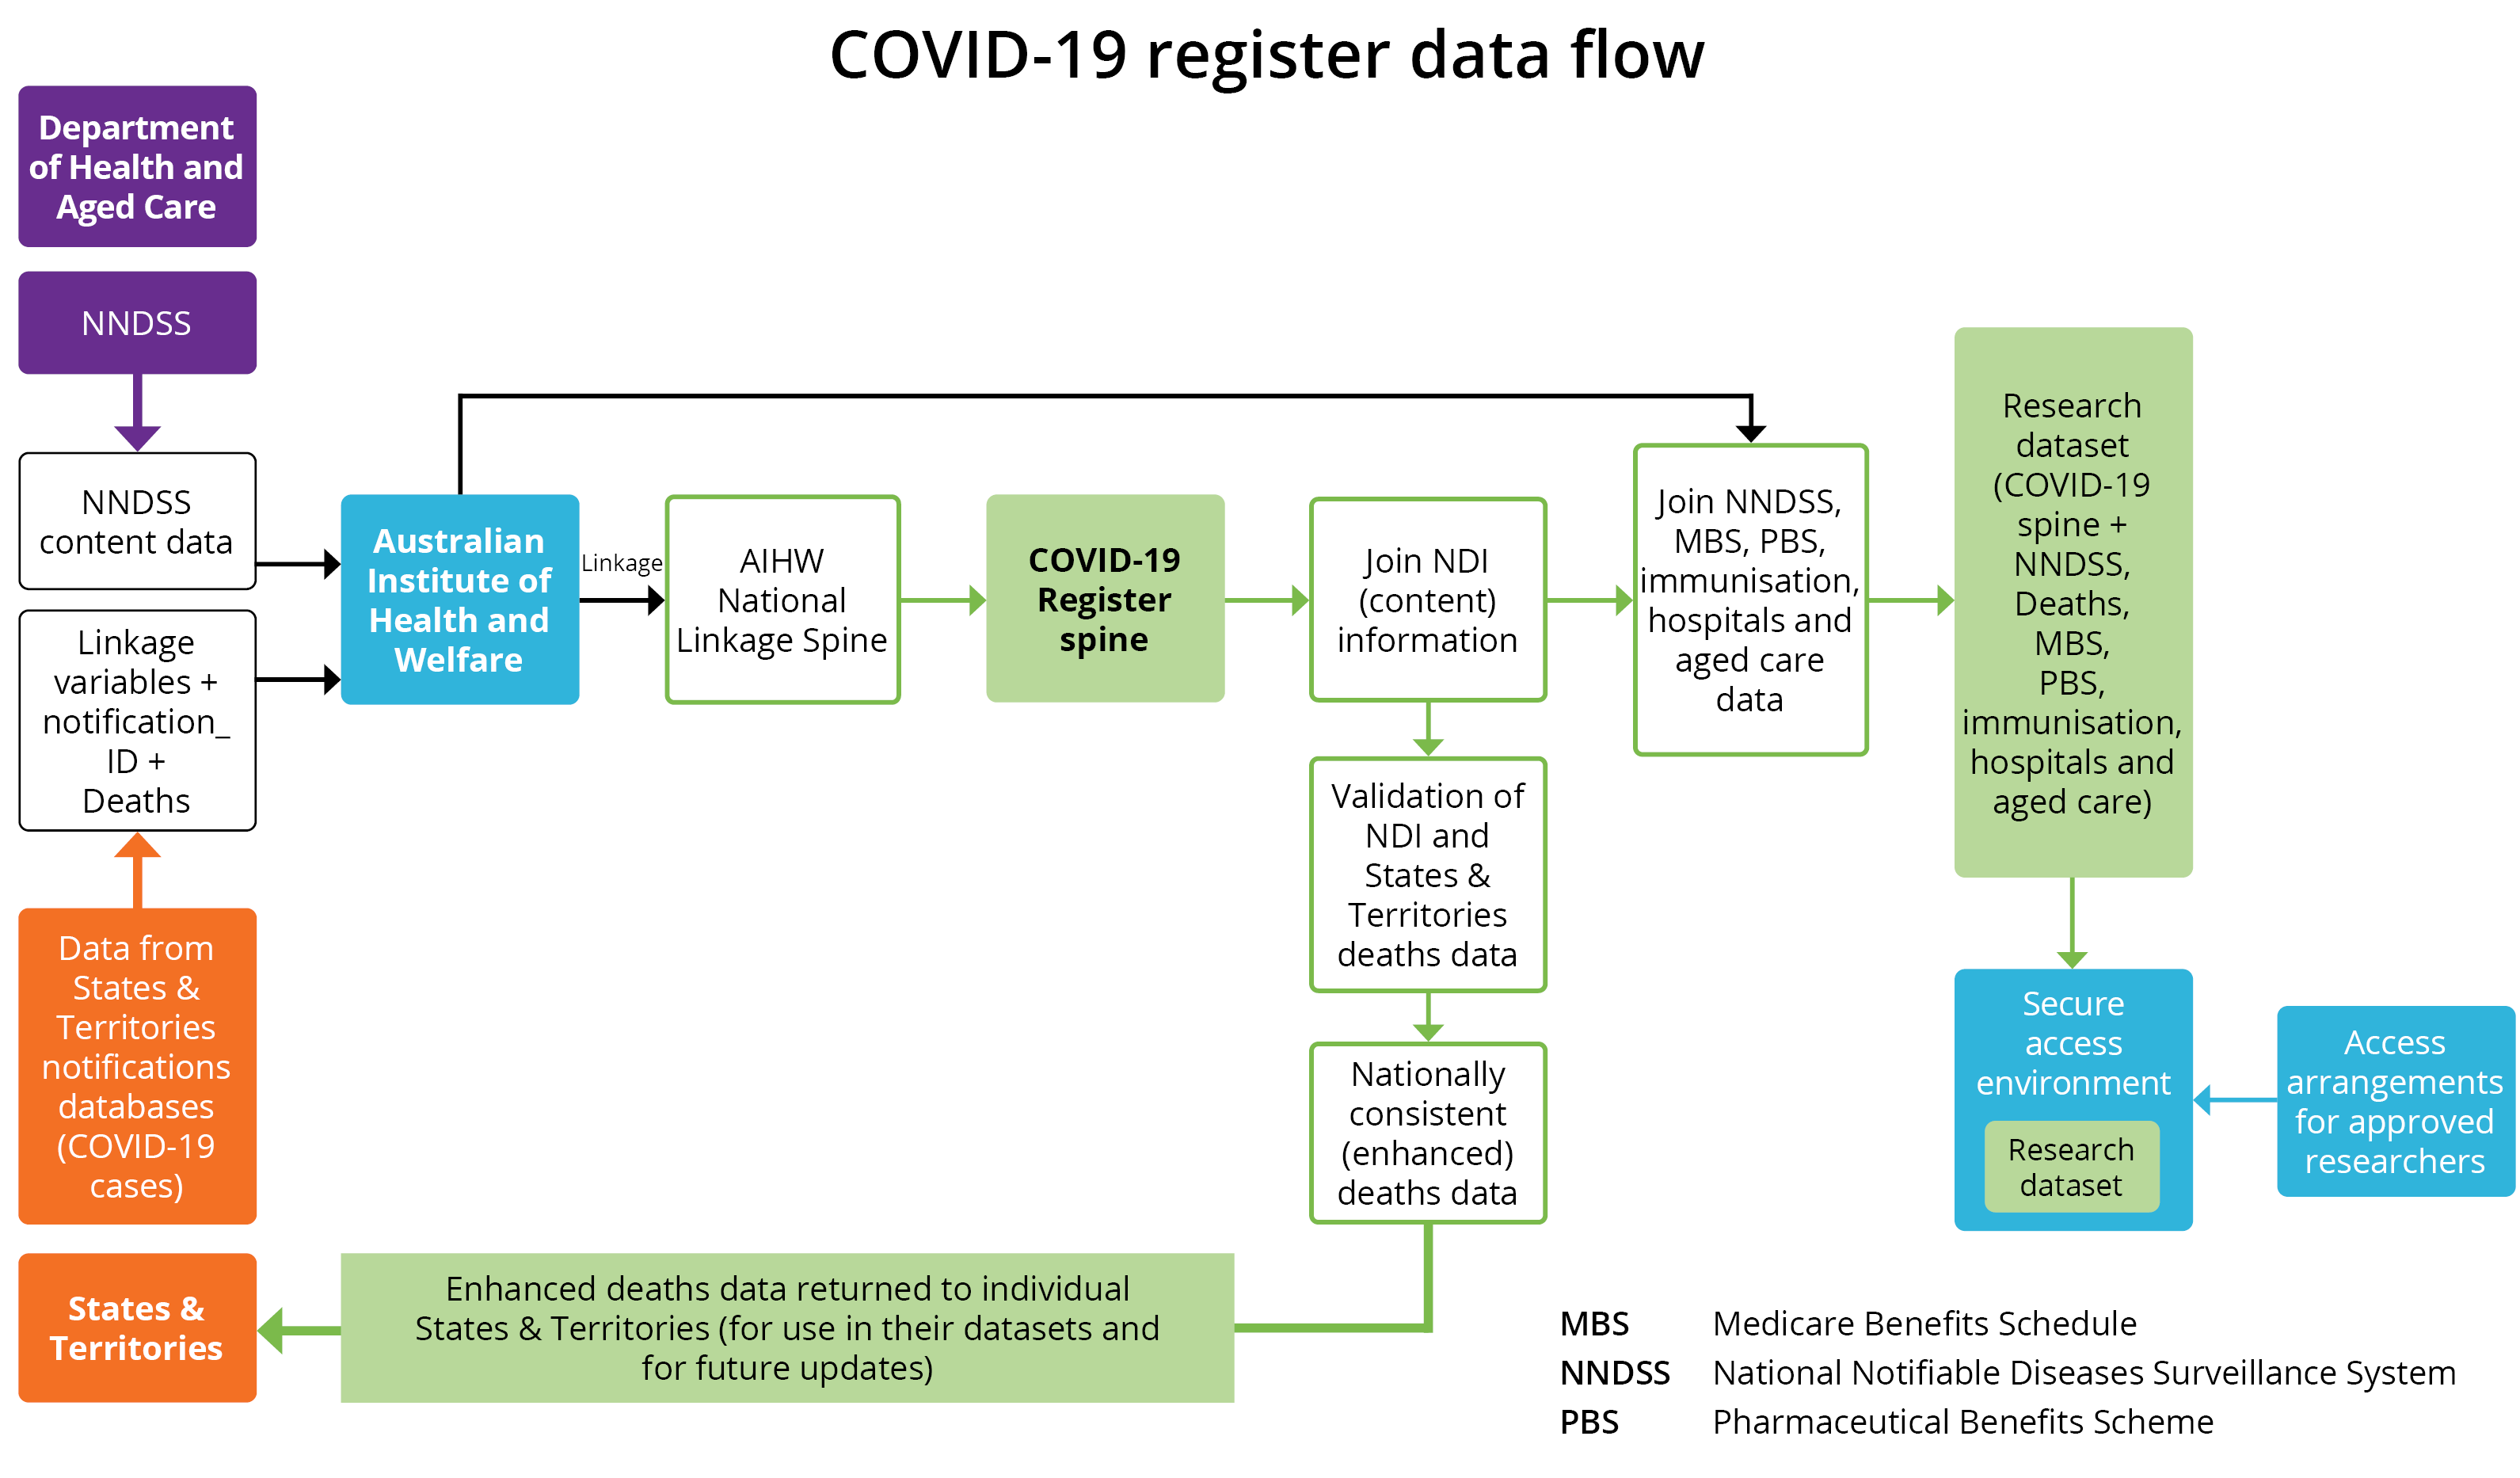 The figure shows the flow of data to be linked in the project. Two boxes, one from the States and territories and the other from the Department of Health are pointing to AIHW, showing the flow of COVID-19 case information, and content information from the NNDSS respectively. Subsequent boxes show how each of the datasets is added on to create a de-identified linked data, stored in a secure access environment. A feedback loop shows linked deaths data being returned to the jurisdictions after linkage.